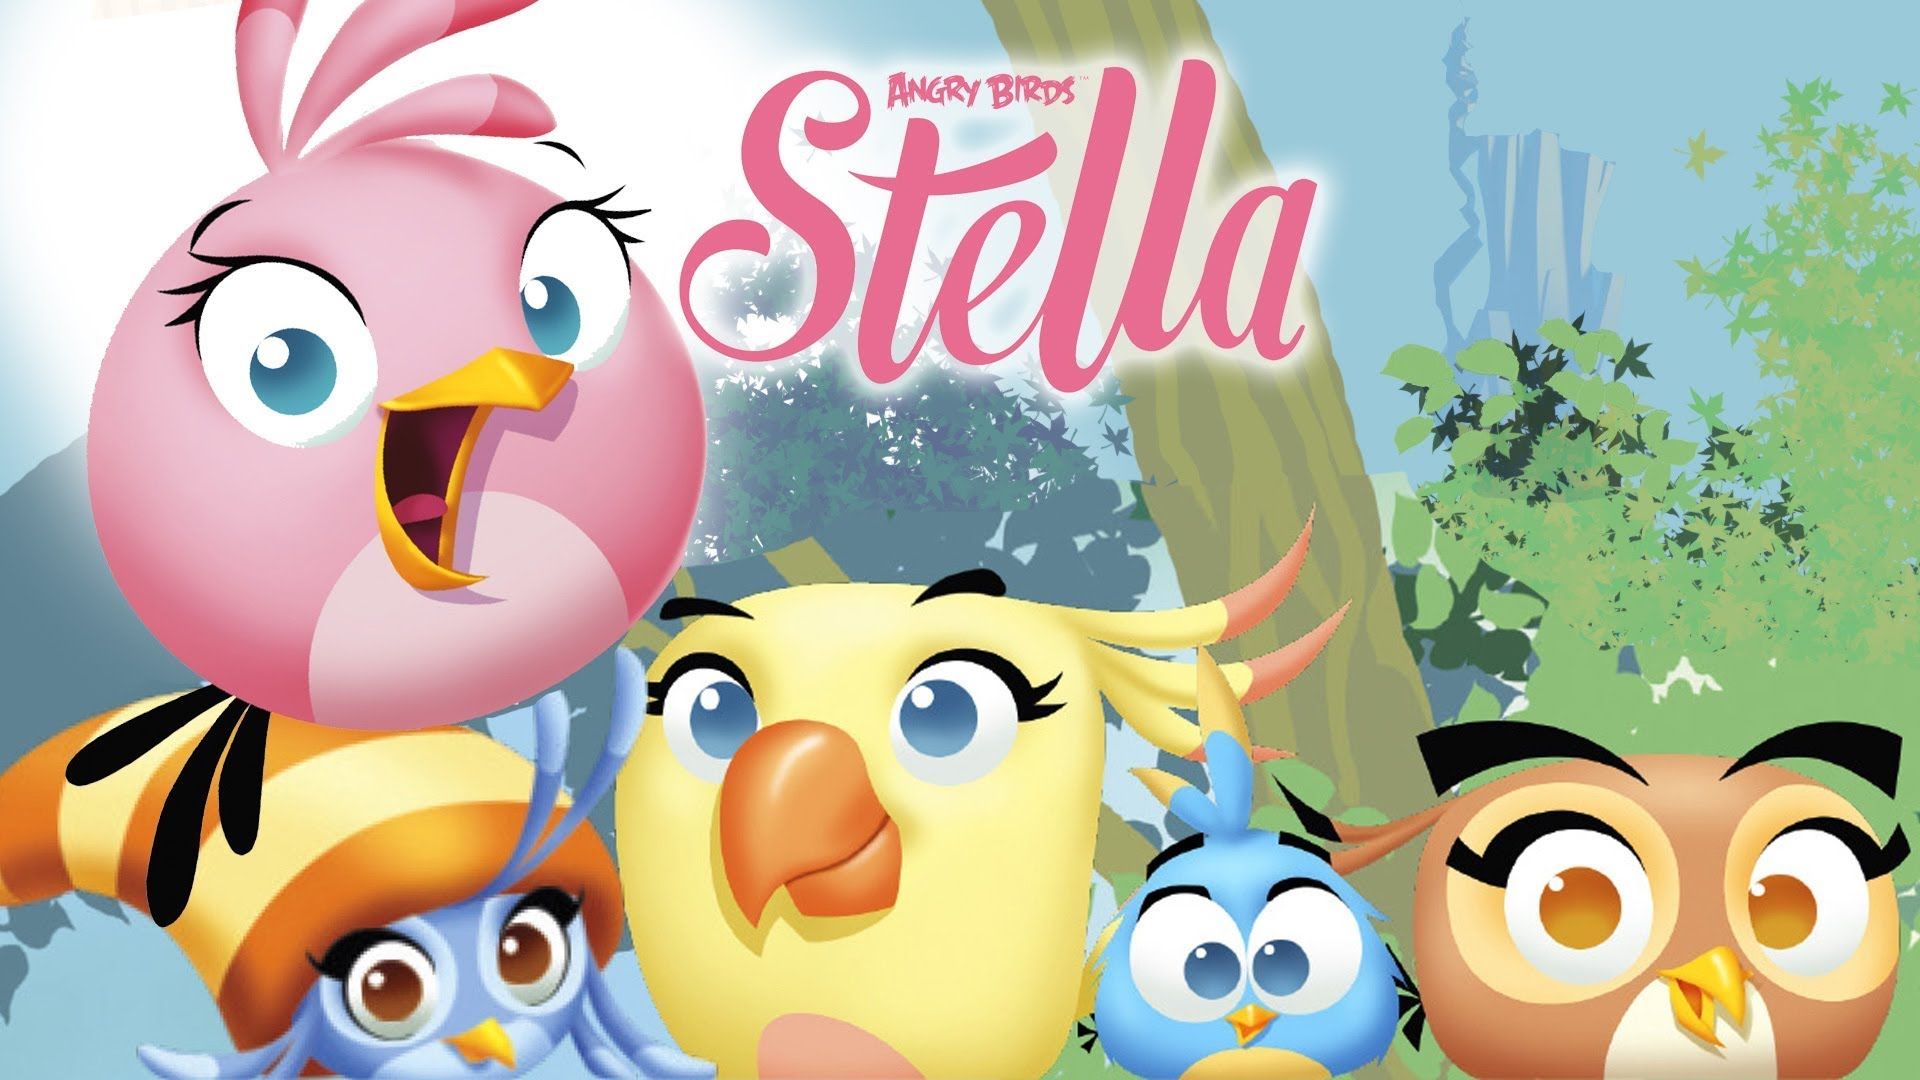 Angry Birds Stella for Android